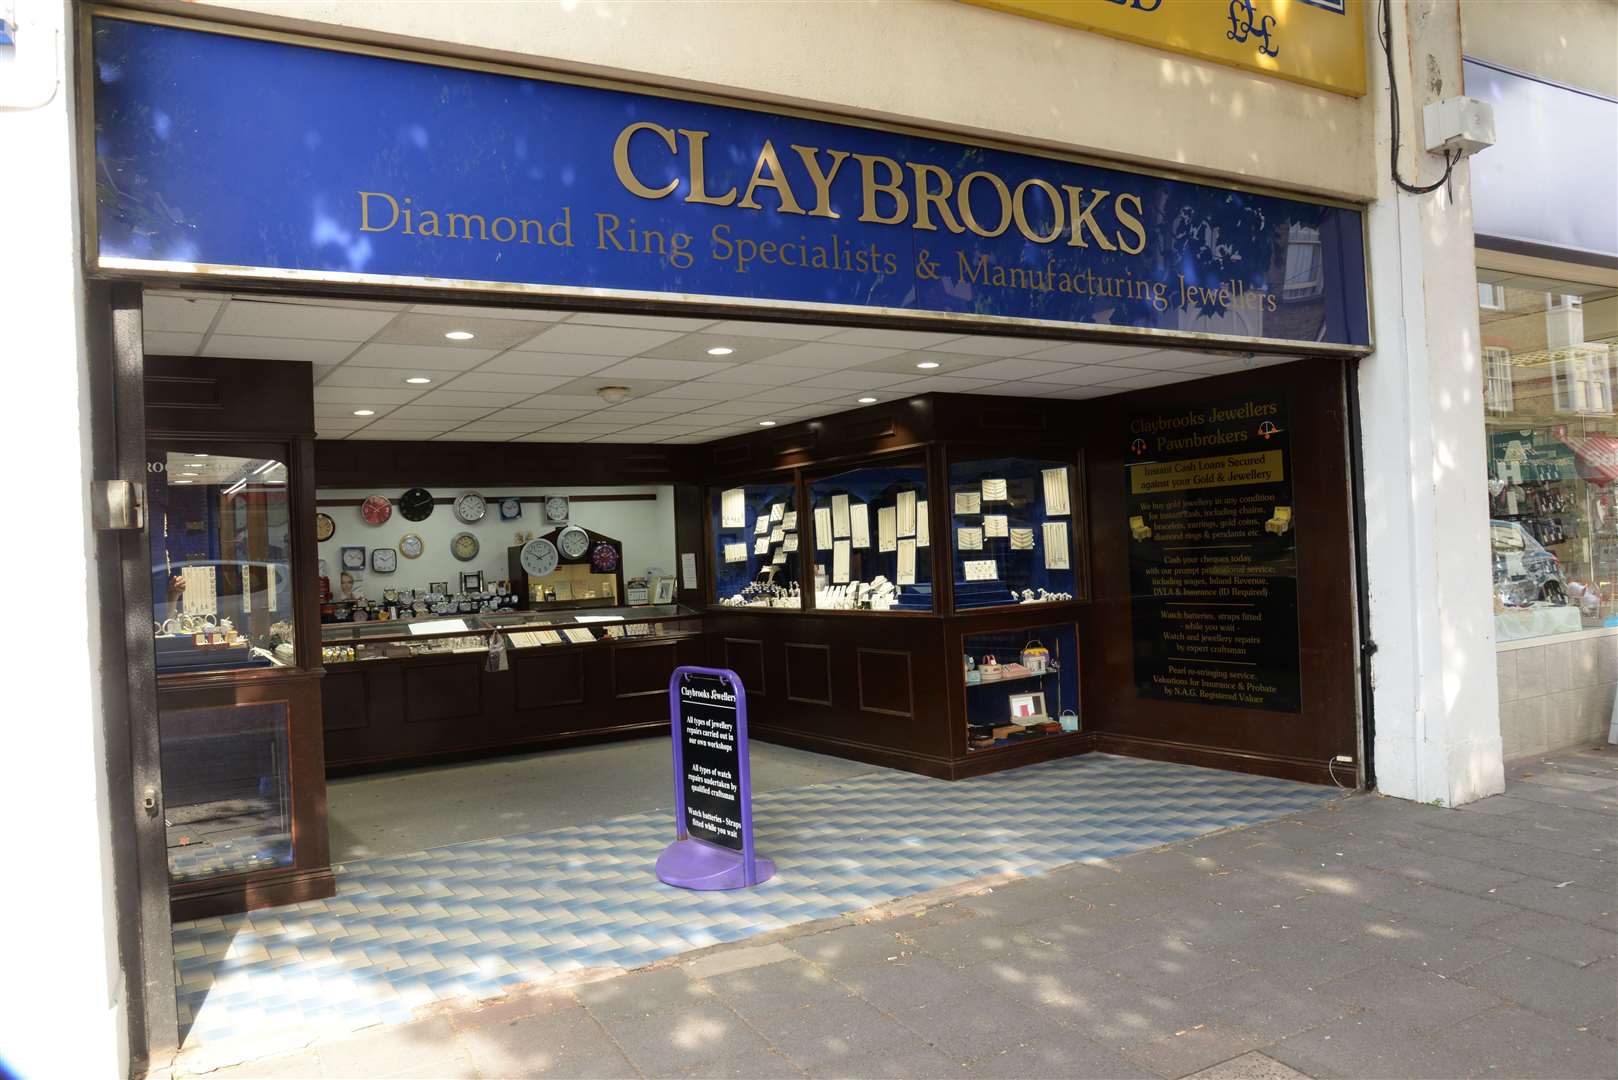 Claybrooks in William Street, Herne Bay, was targeted earlier this year